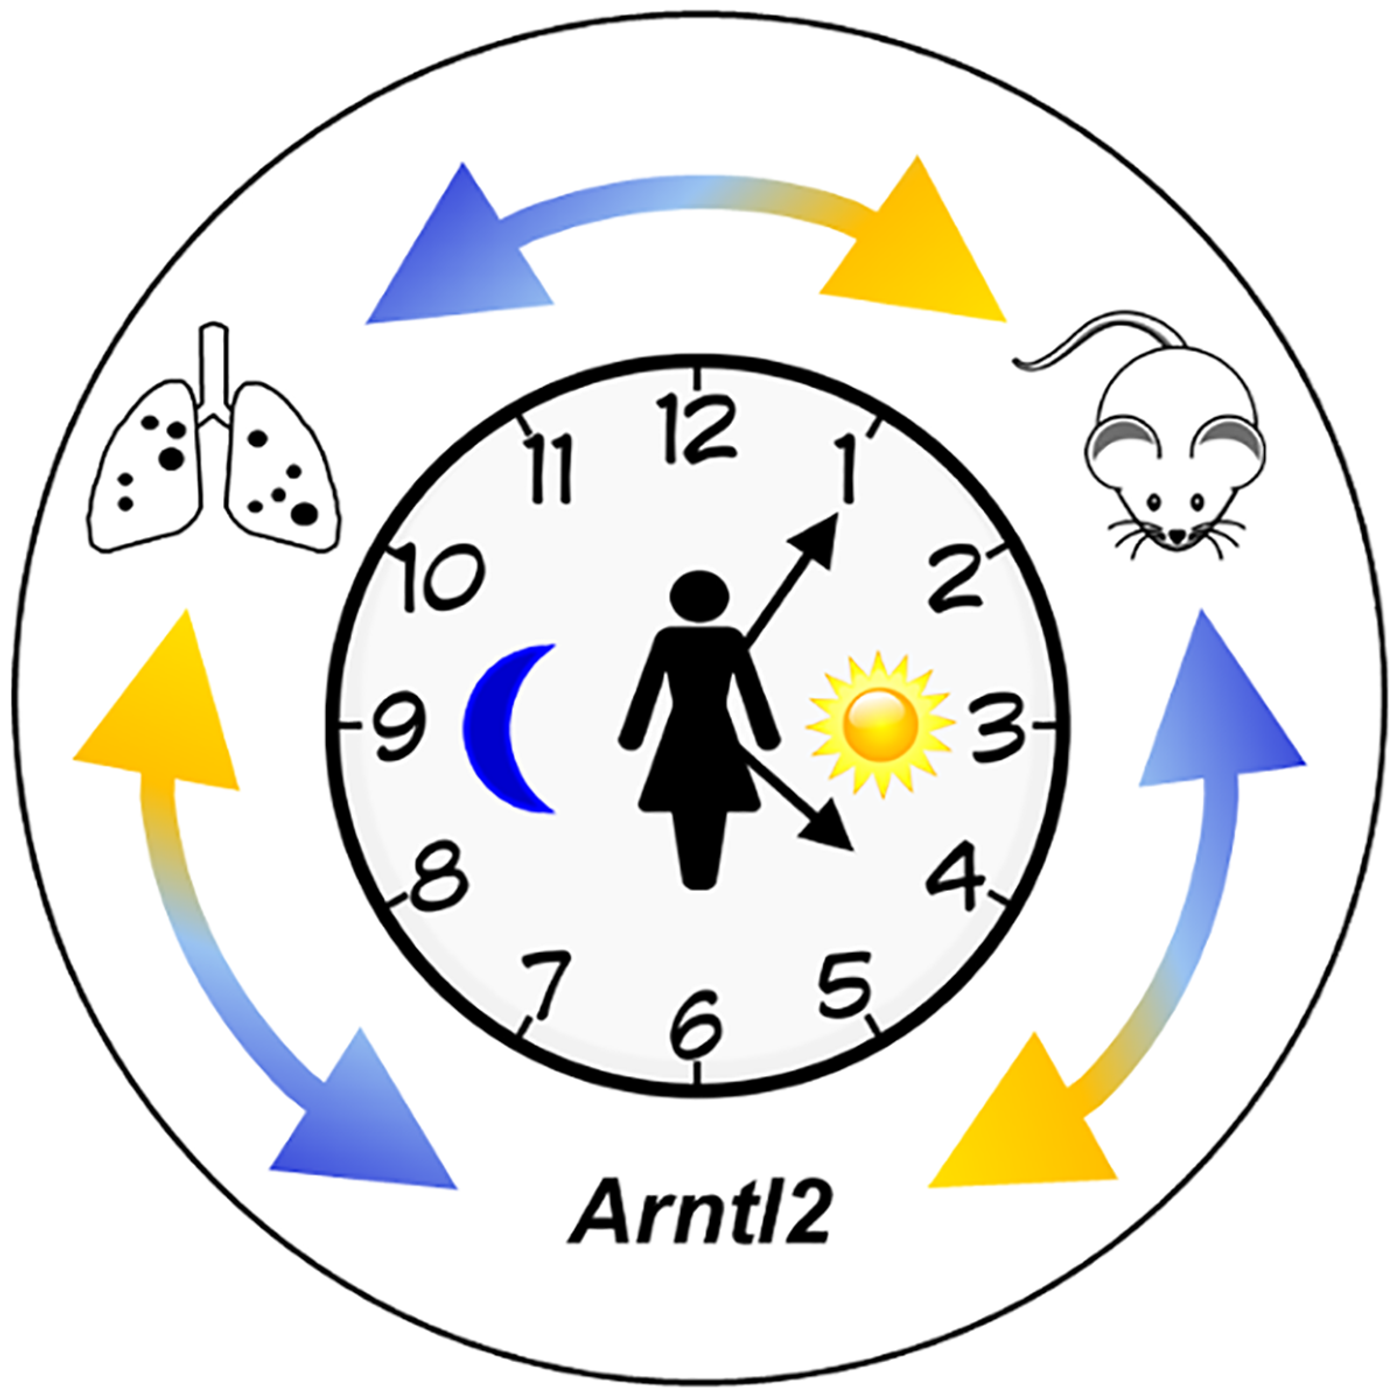 Identification of the circadian rhythm Arntl2 gene and its relationship to cancer metastases (Siracusa LD, Bussard KM; 2016)